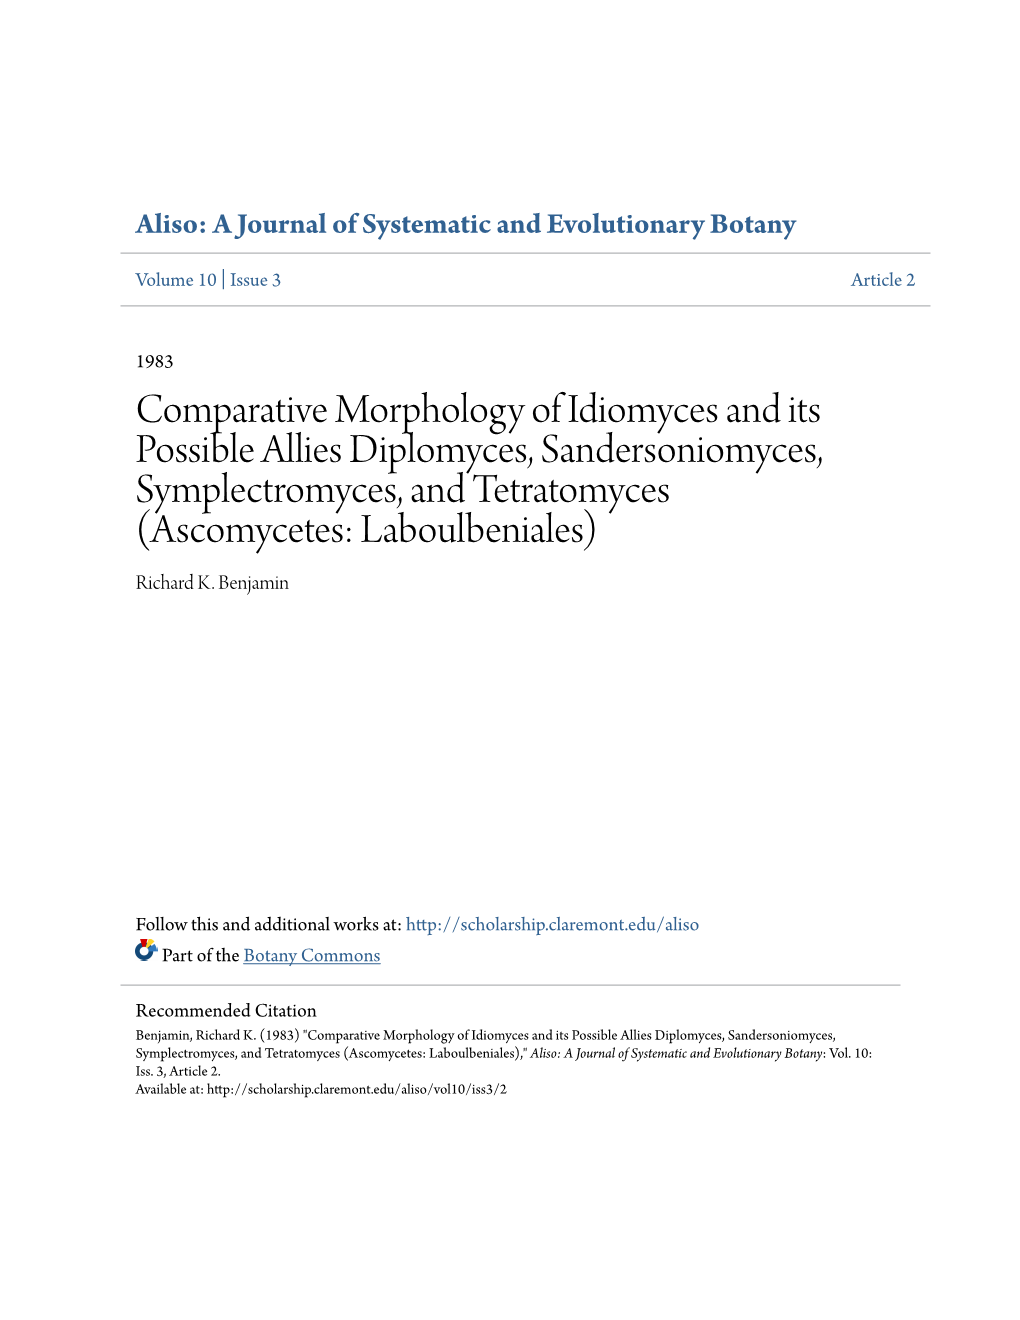 Comparative Morphology of Idiomyces and Its Possible Allies Diplomyces, Sandersoniomyces, Symplectromyces, and Tetratomyces (Ascomycetes: Laboulbeniales) Richard K